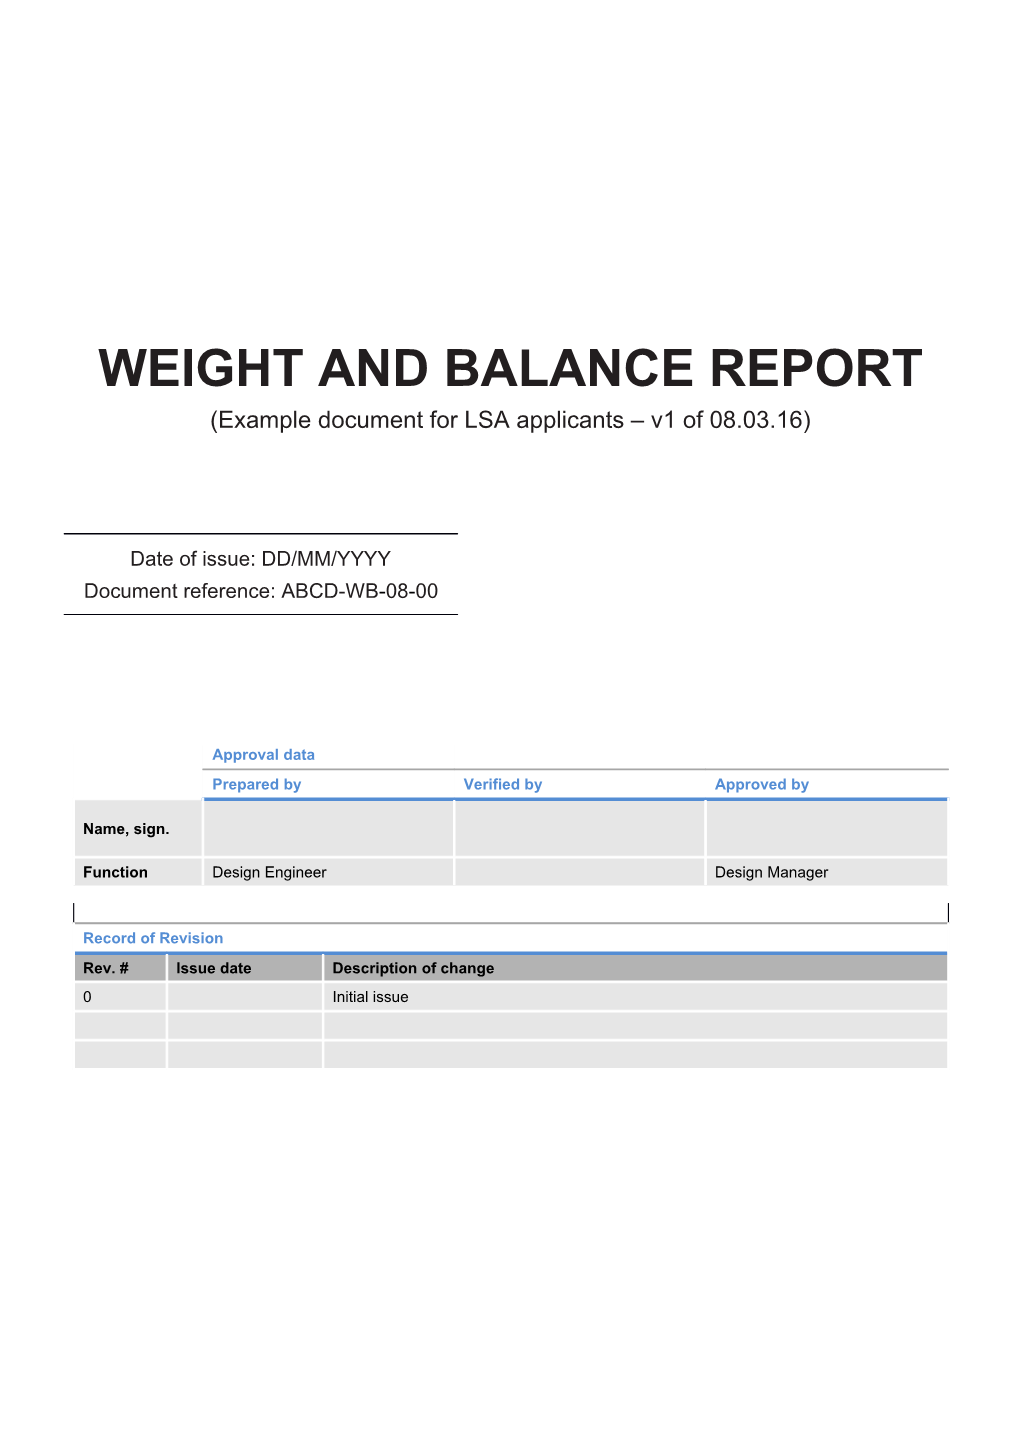 Weight and Balance Report